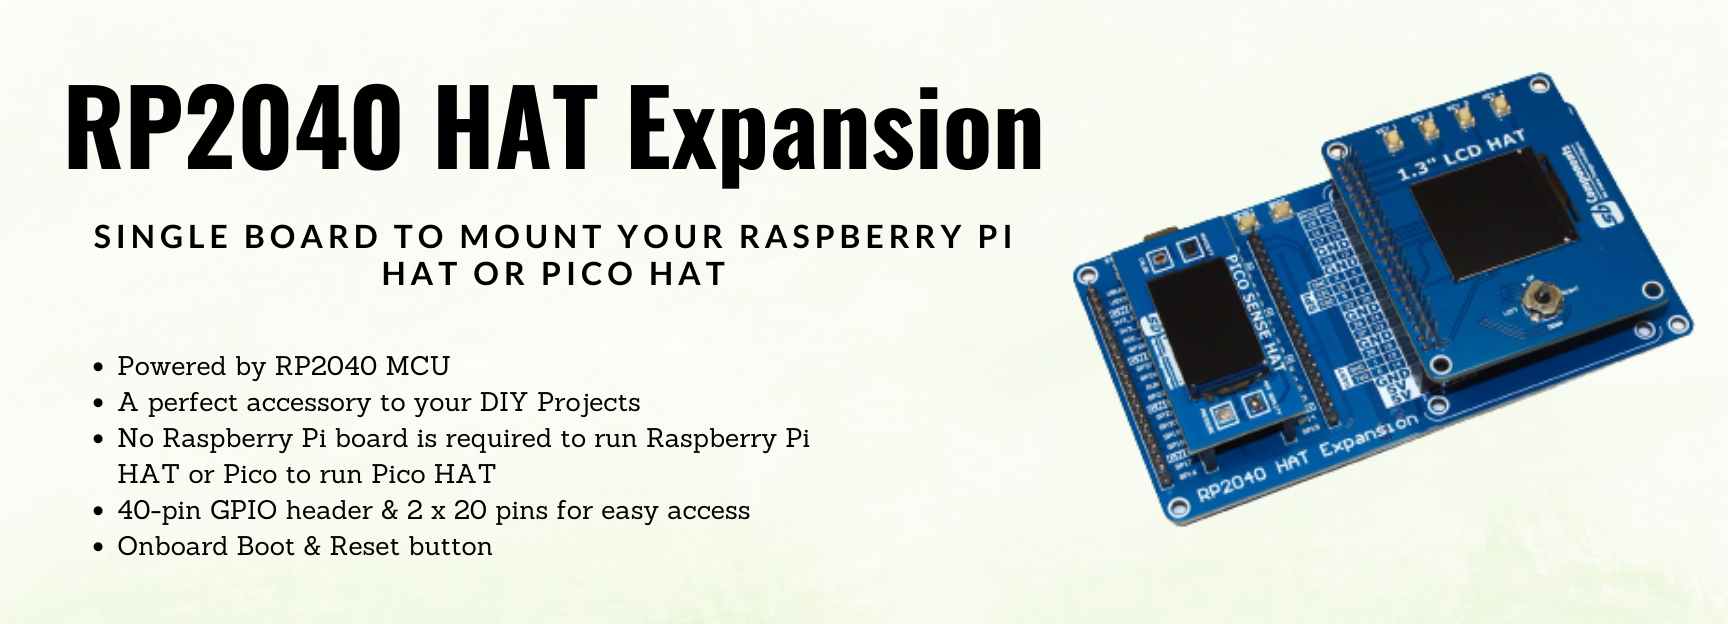 RP2040 HAT Expansion